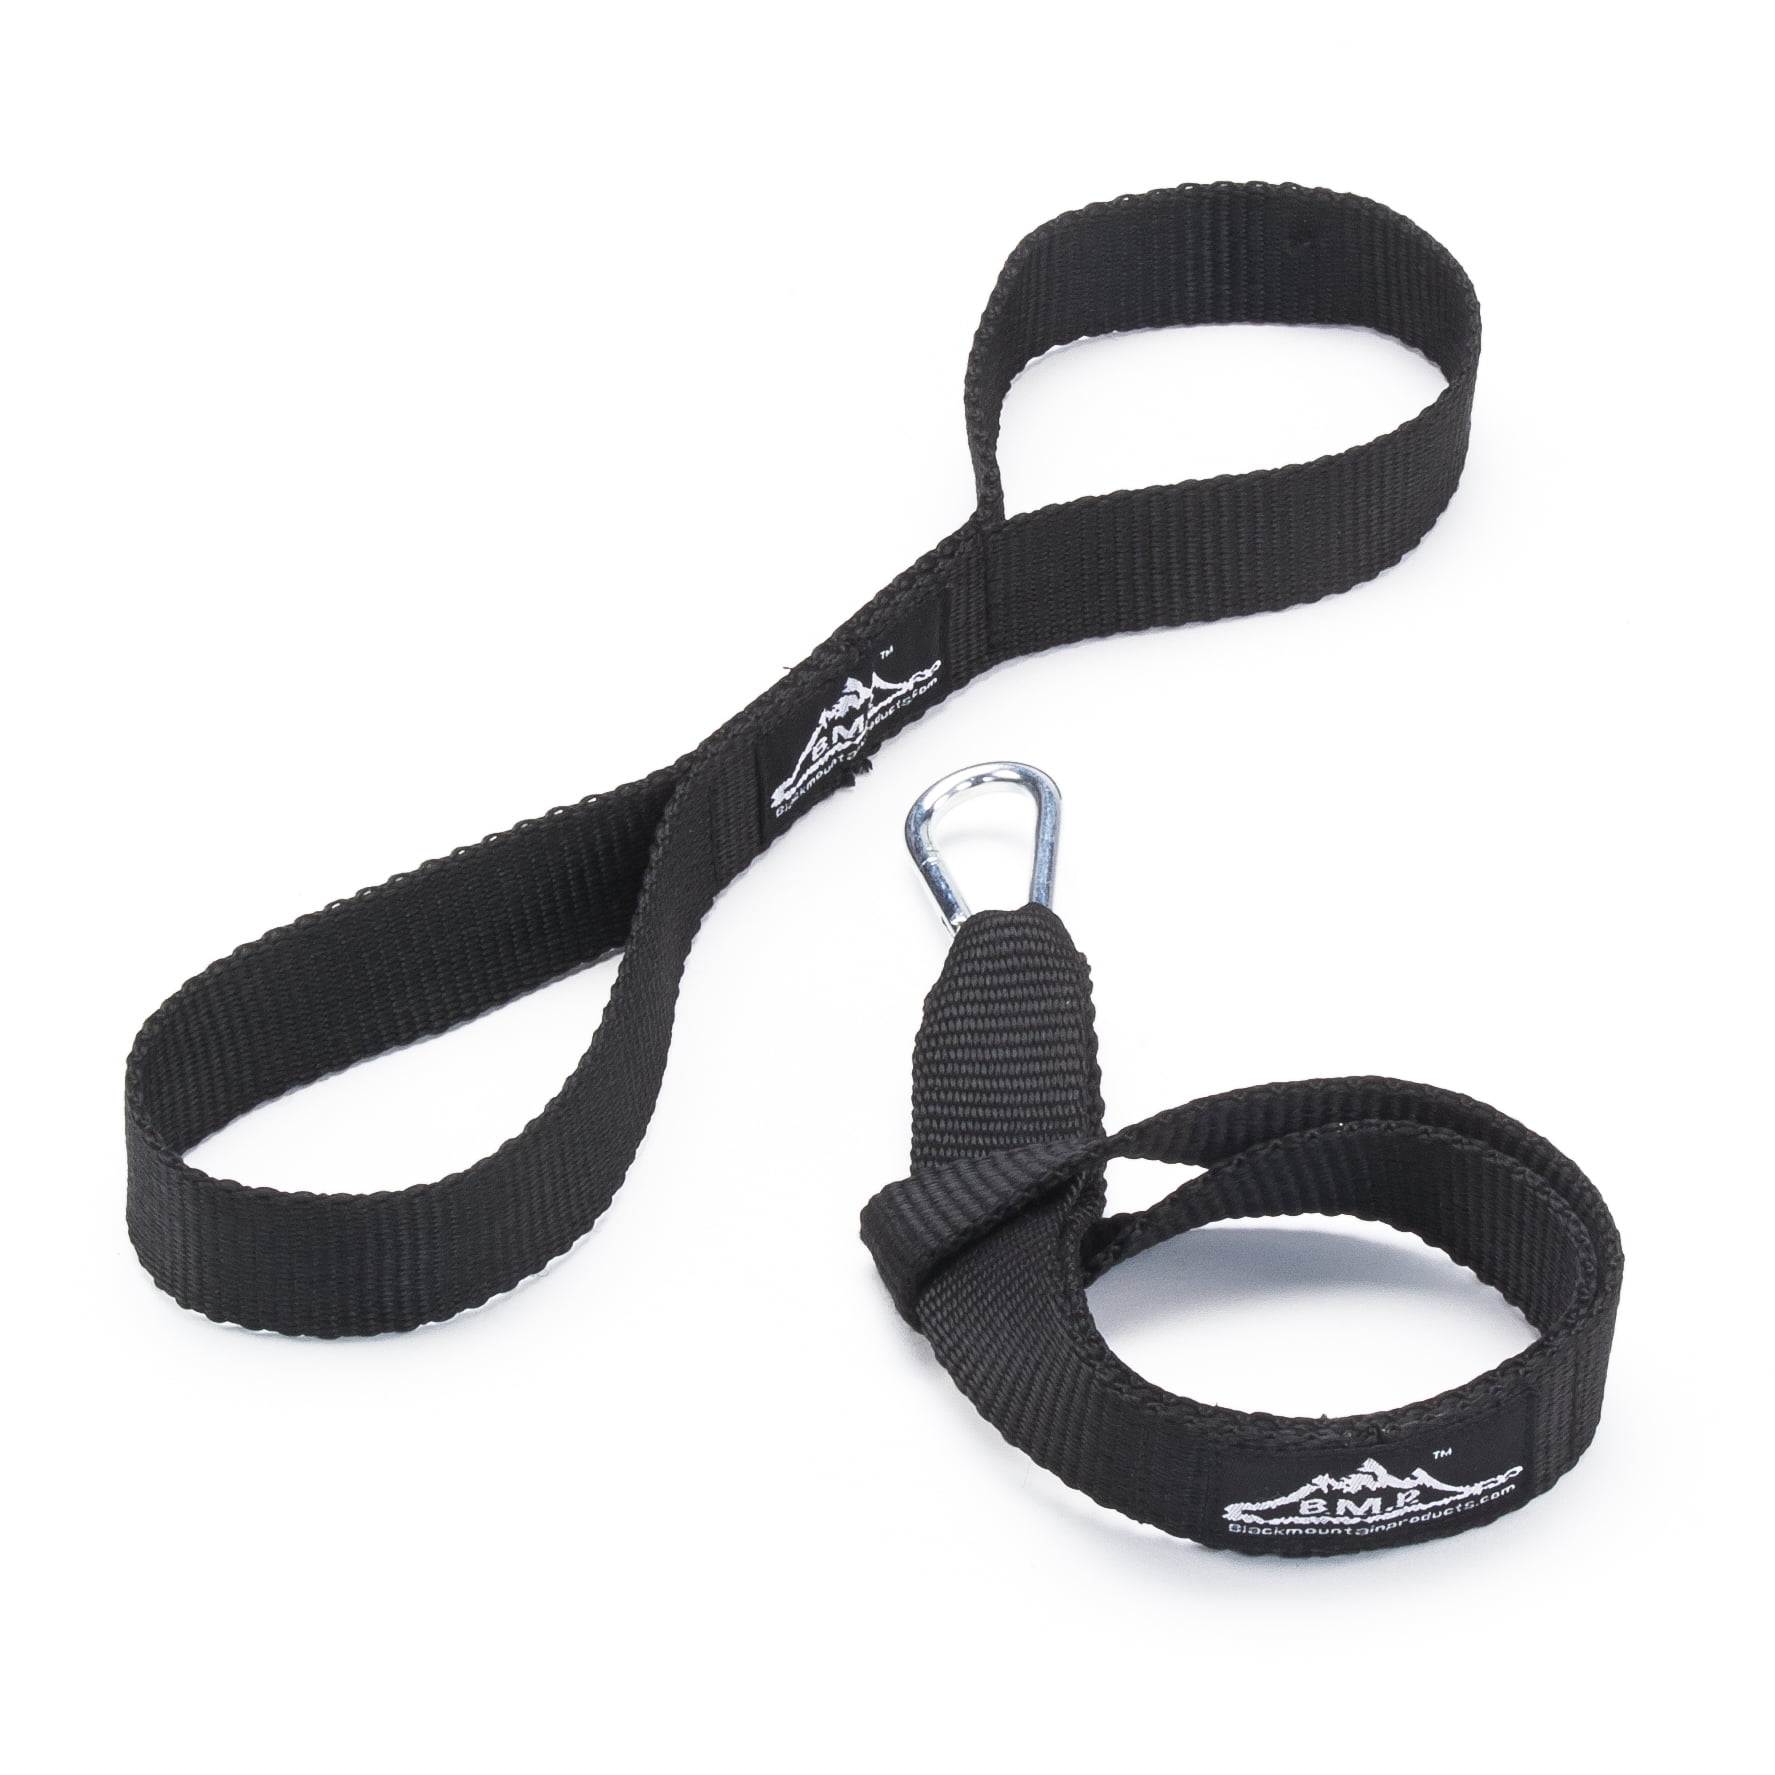 Picture of Black Mountain Products Battle Rope Anchor Battle Rope Anchor Kit with Nylon Straps & Carabiner Clip, Black